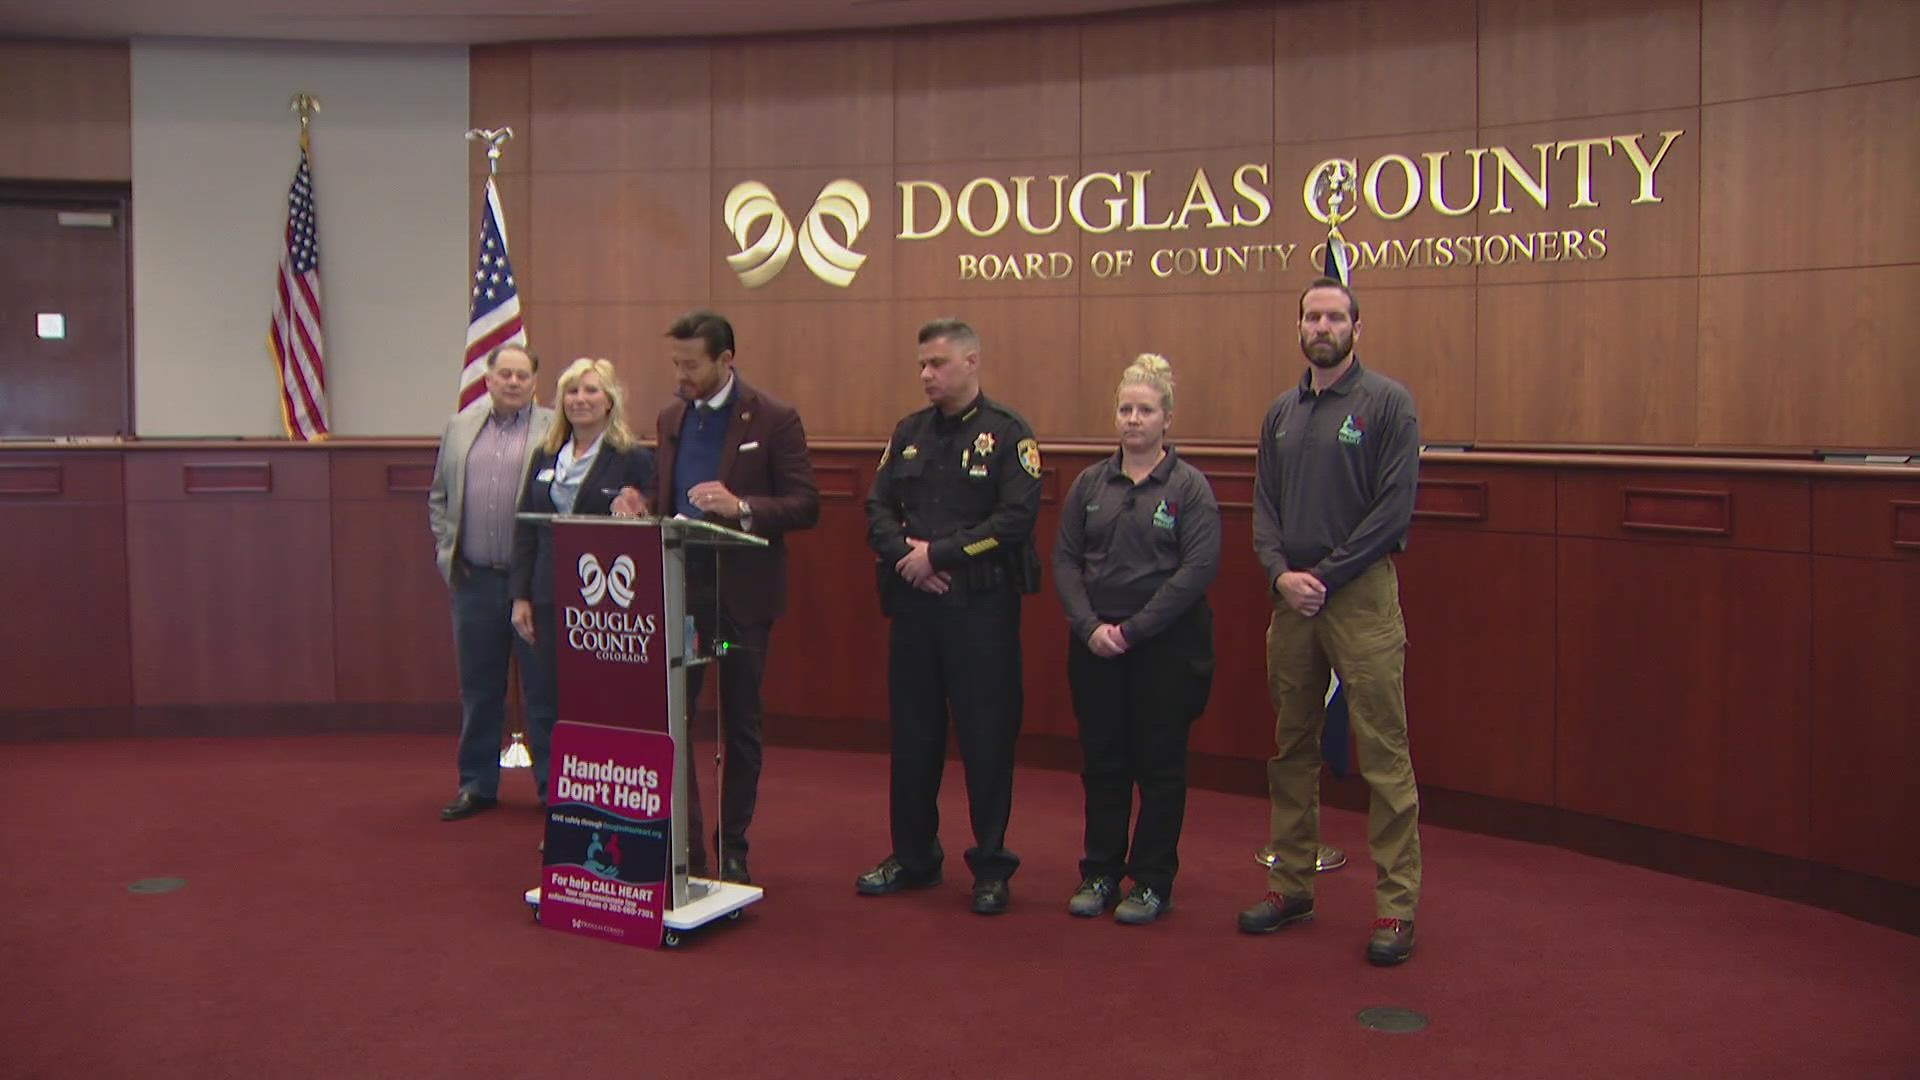 Douglas County Commissioners are celebrating because they say that they've reduced the number of people living on their streets.